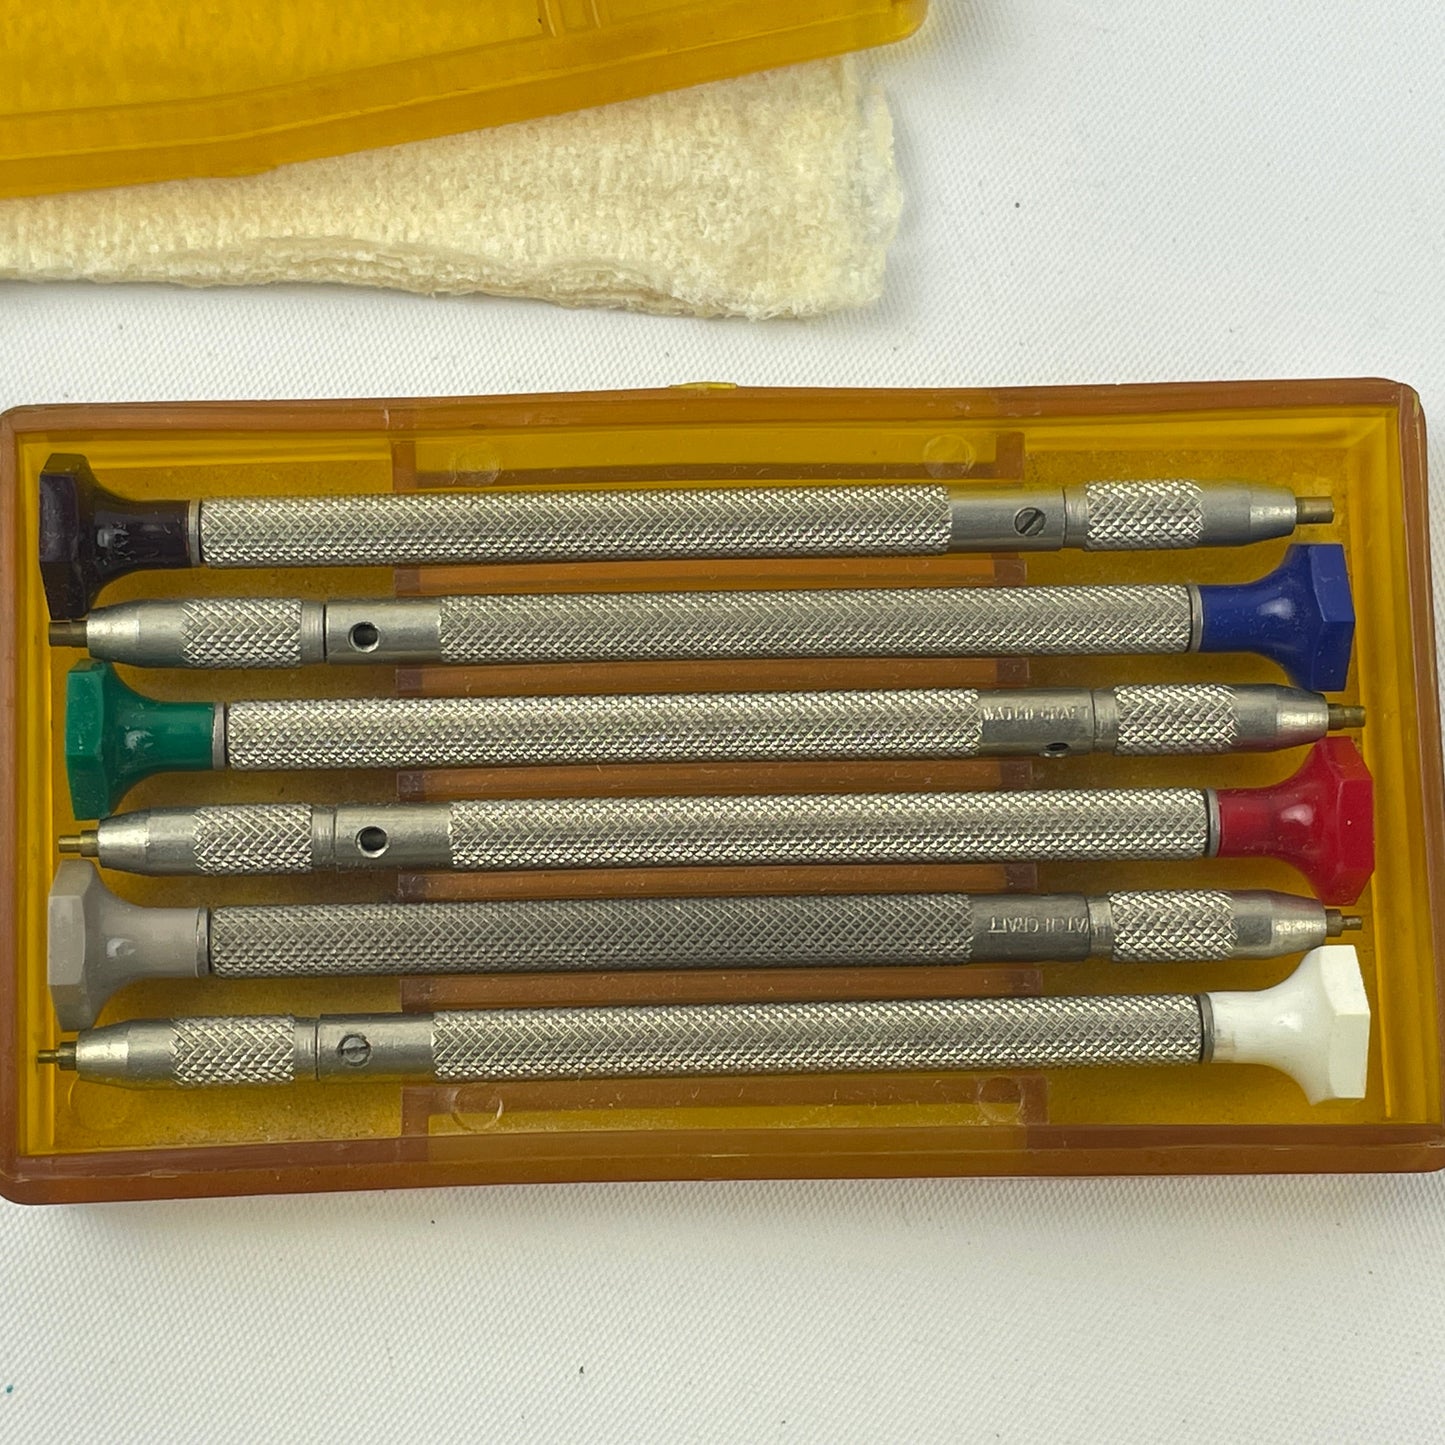 Apr Lot 106- Watch-Craft for C. E. Marshall Boxed Set of Balance Screw Undercutters